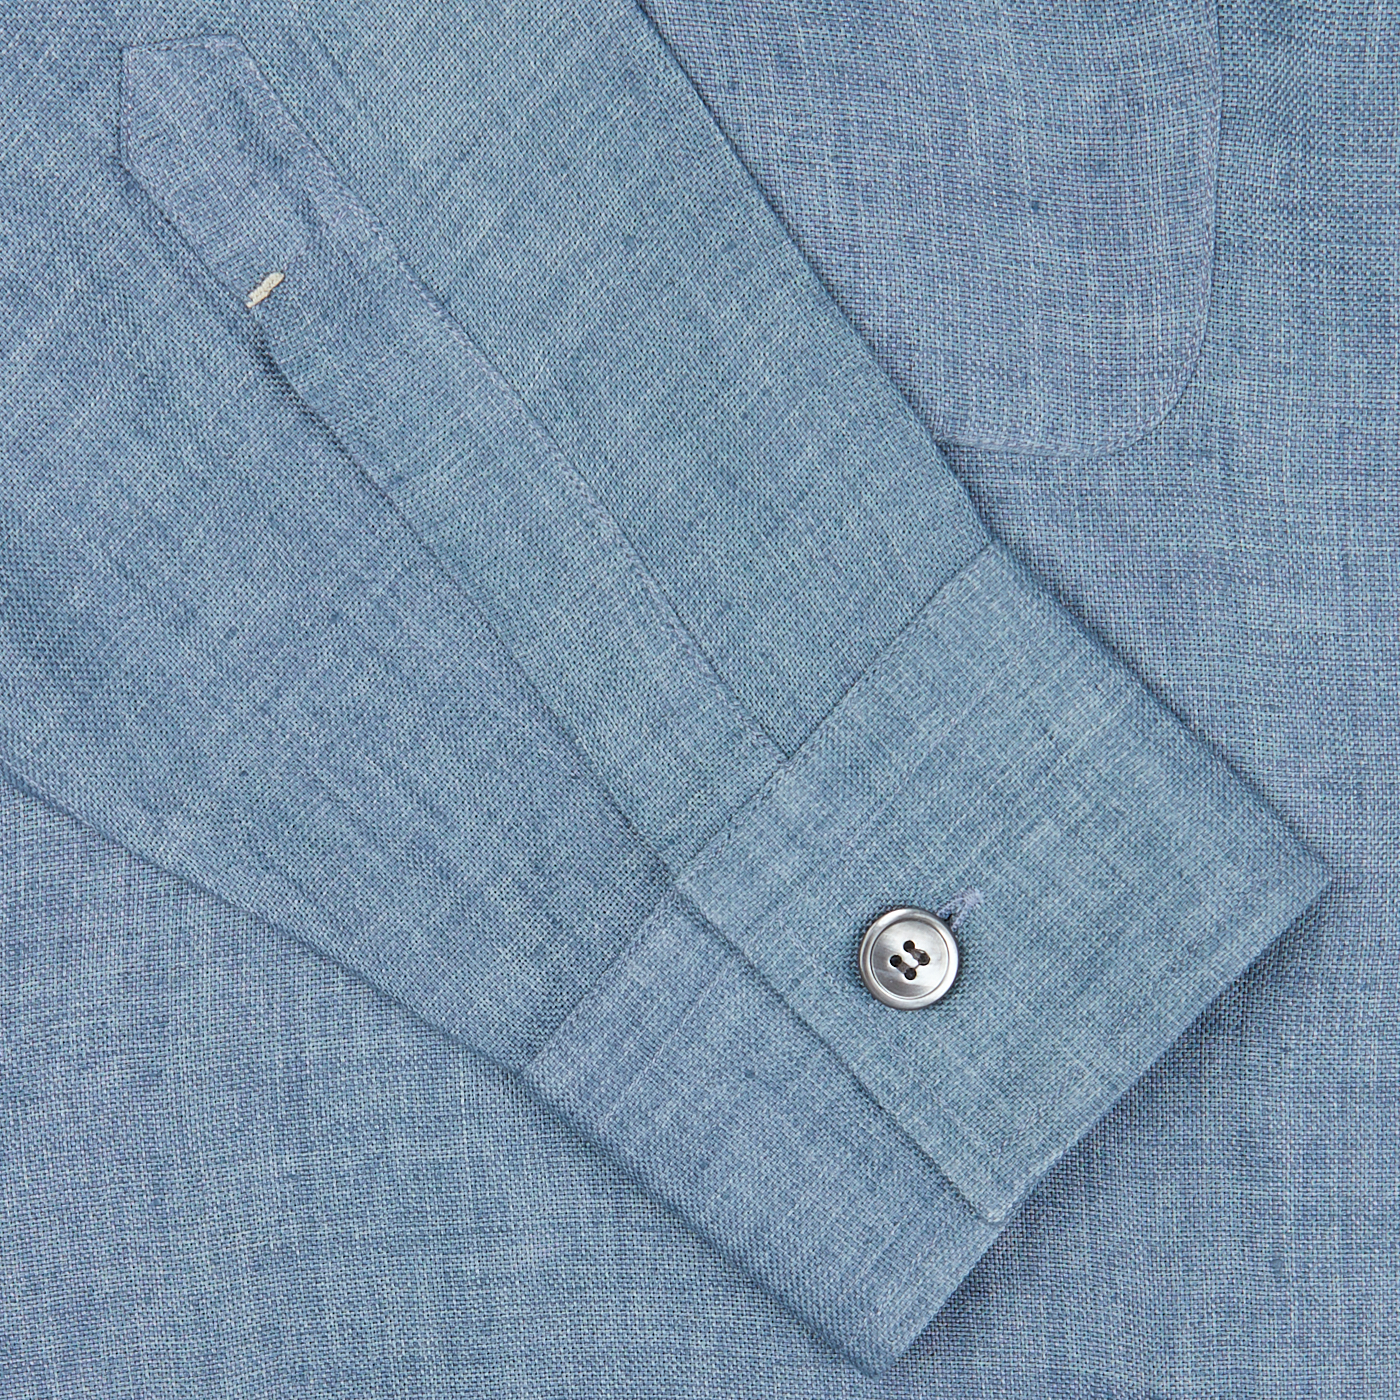 Close-up of a Mazzarelli Indigo Blue Organic Linen Four Pocket Overshirt cuff with a silver button and detailed stitching.